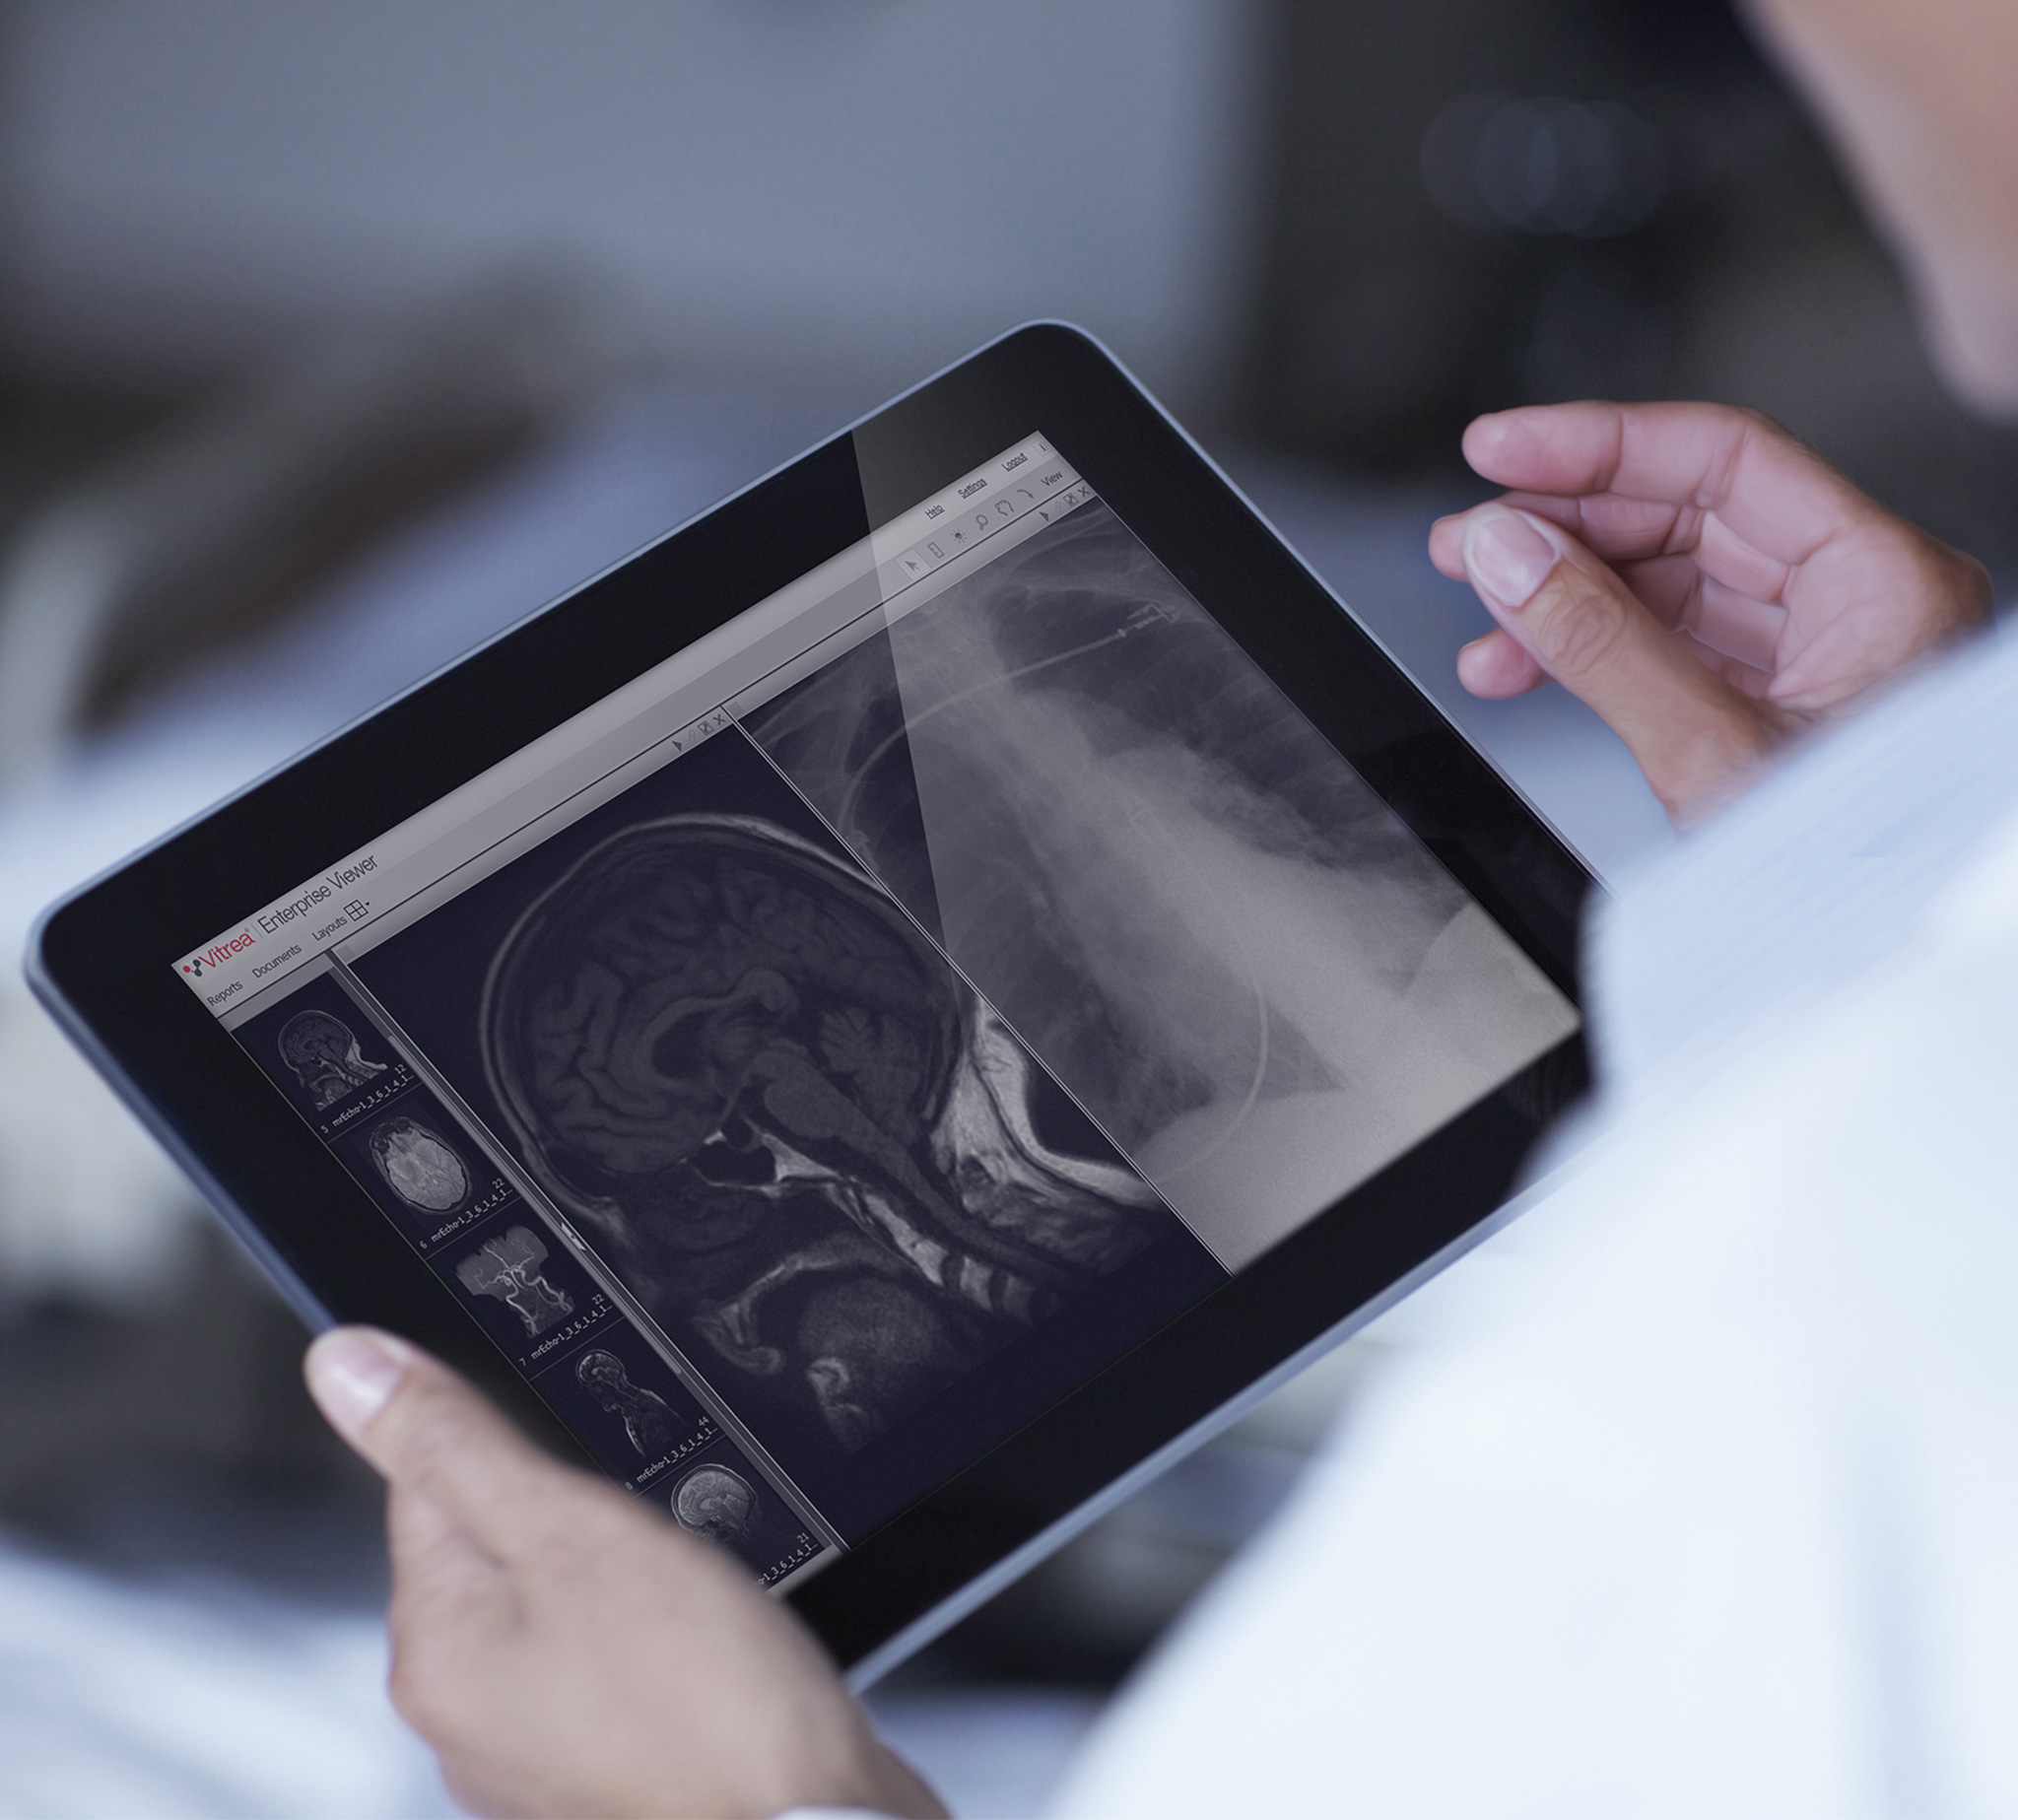 Doctor viewing diagnostic images on tablet.